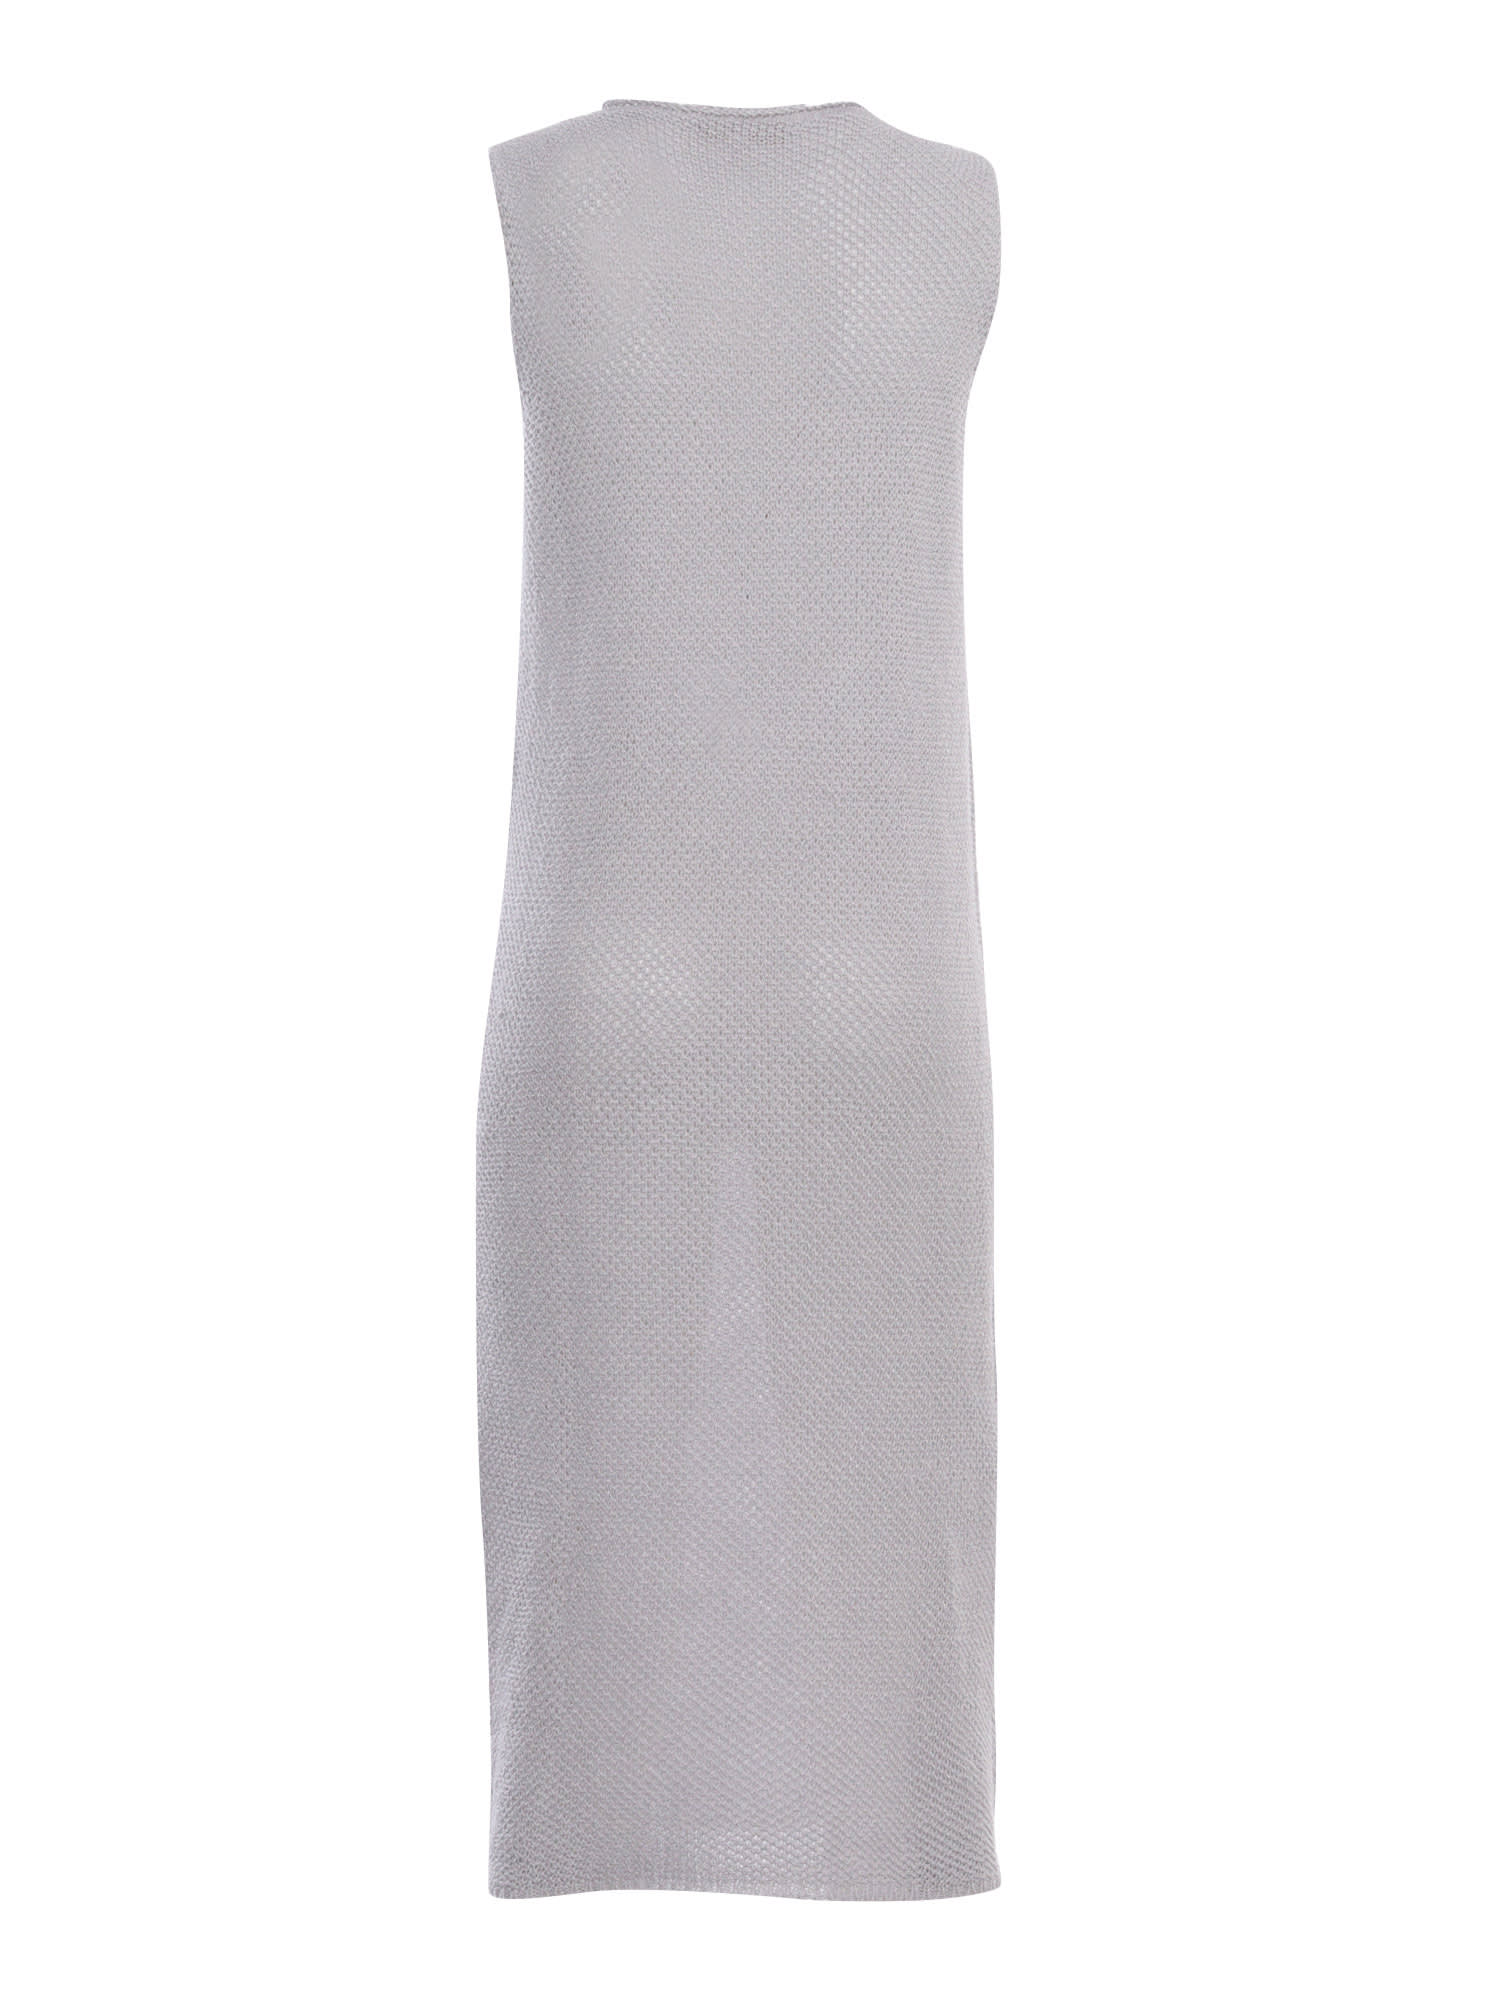 Shop Antonelli Silver Knitted Tricot Dress